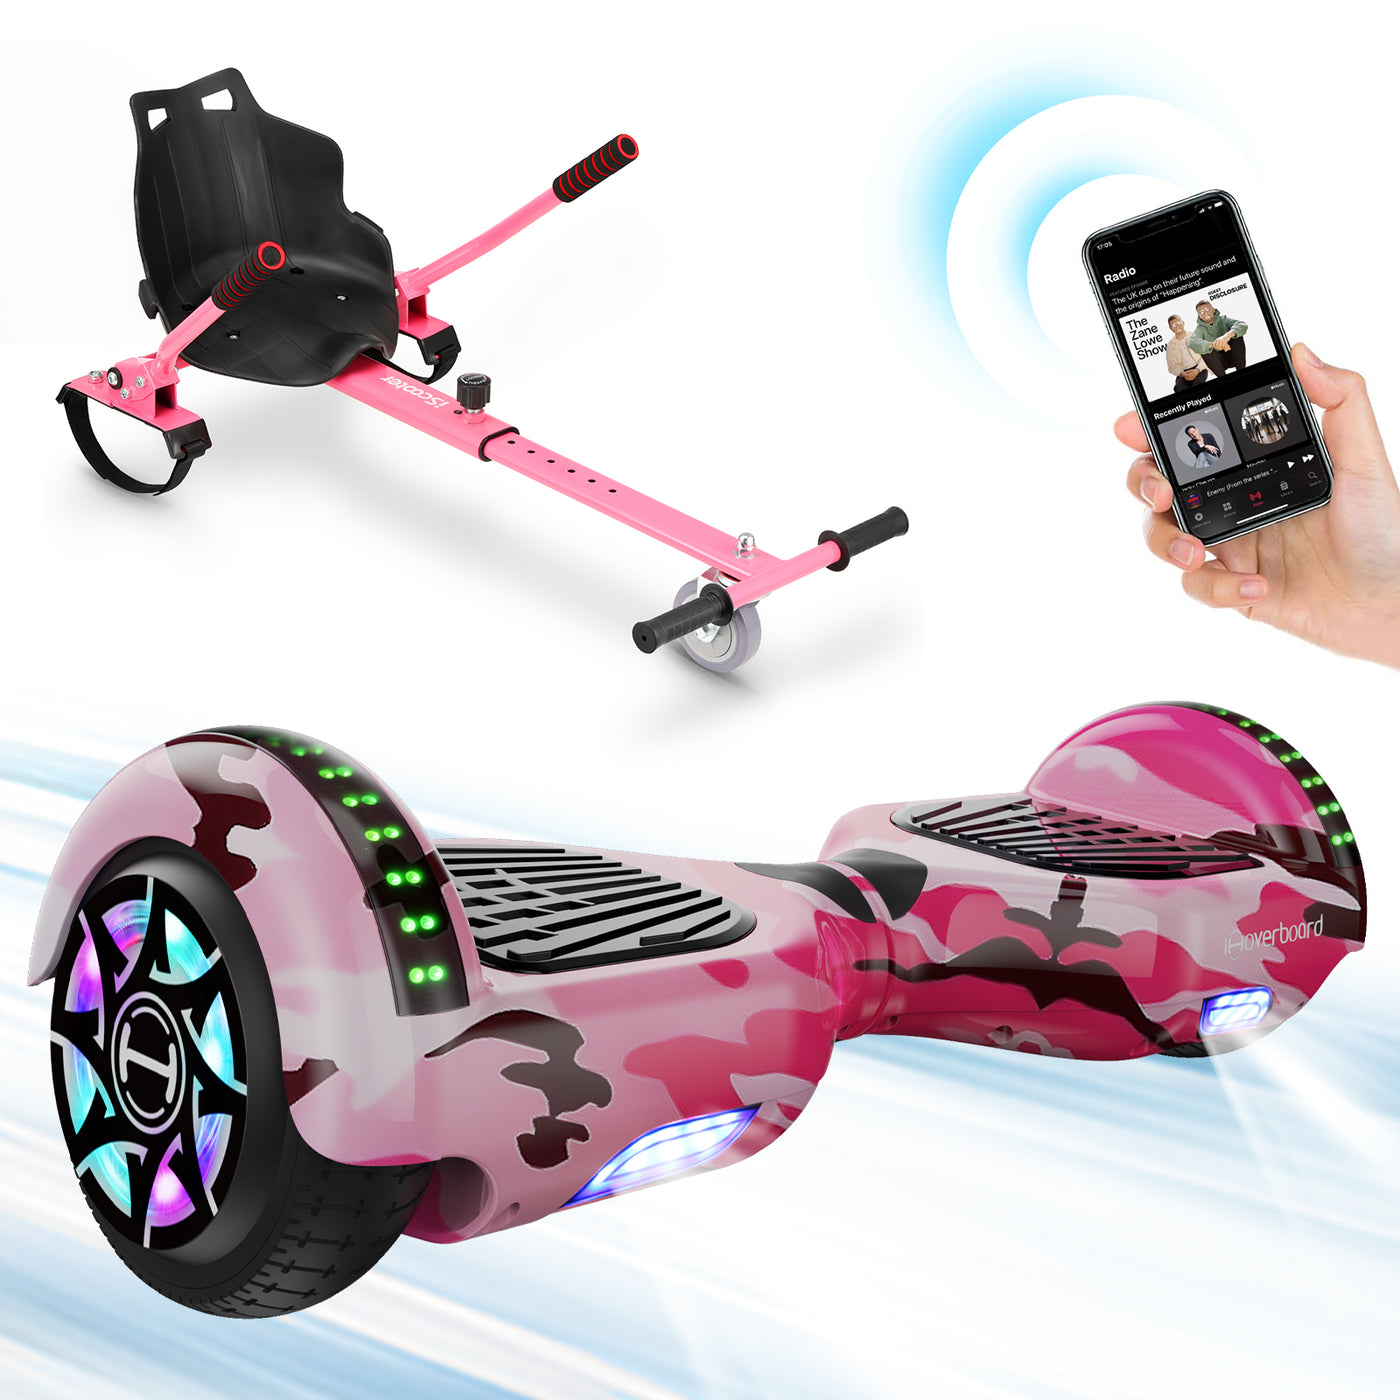 H1 Camouflage Pink Hoverboard, Hoverboard mit sitz